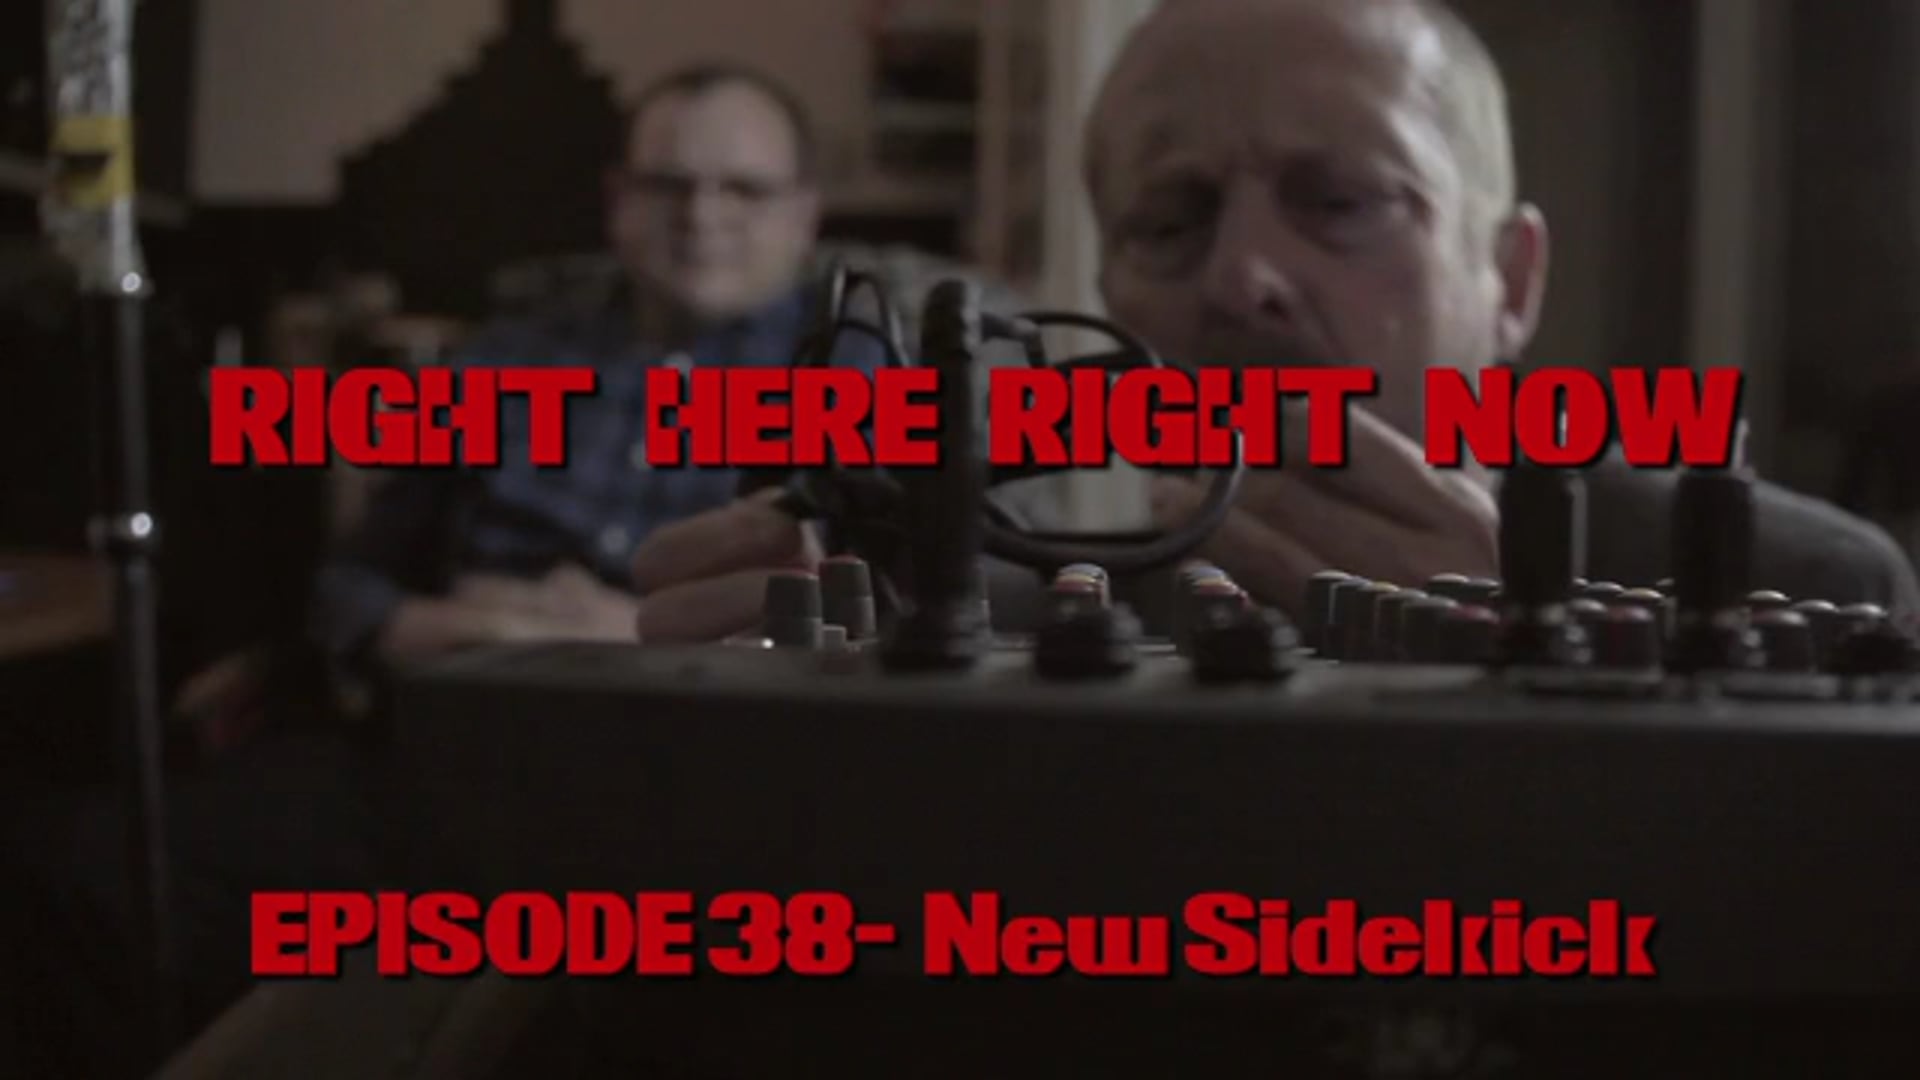 Watch Right Here Right Now: Episode 39 (New Side Kick) on our Free Roku Channel